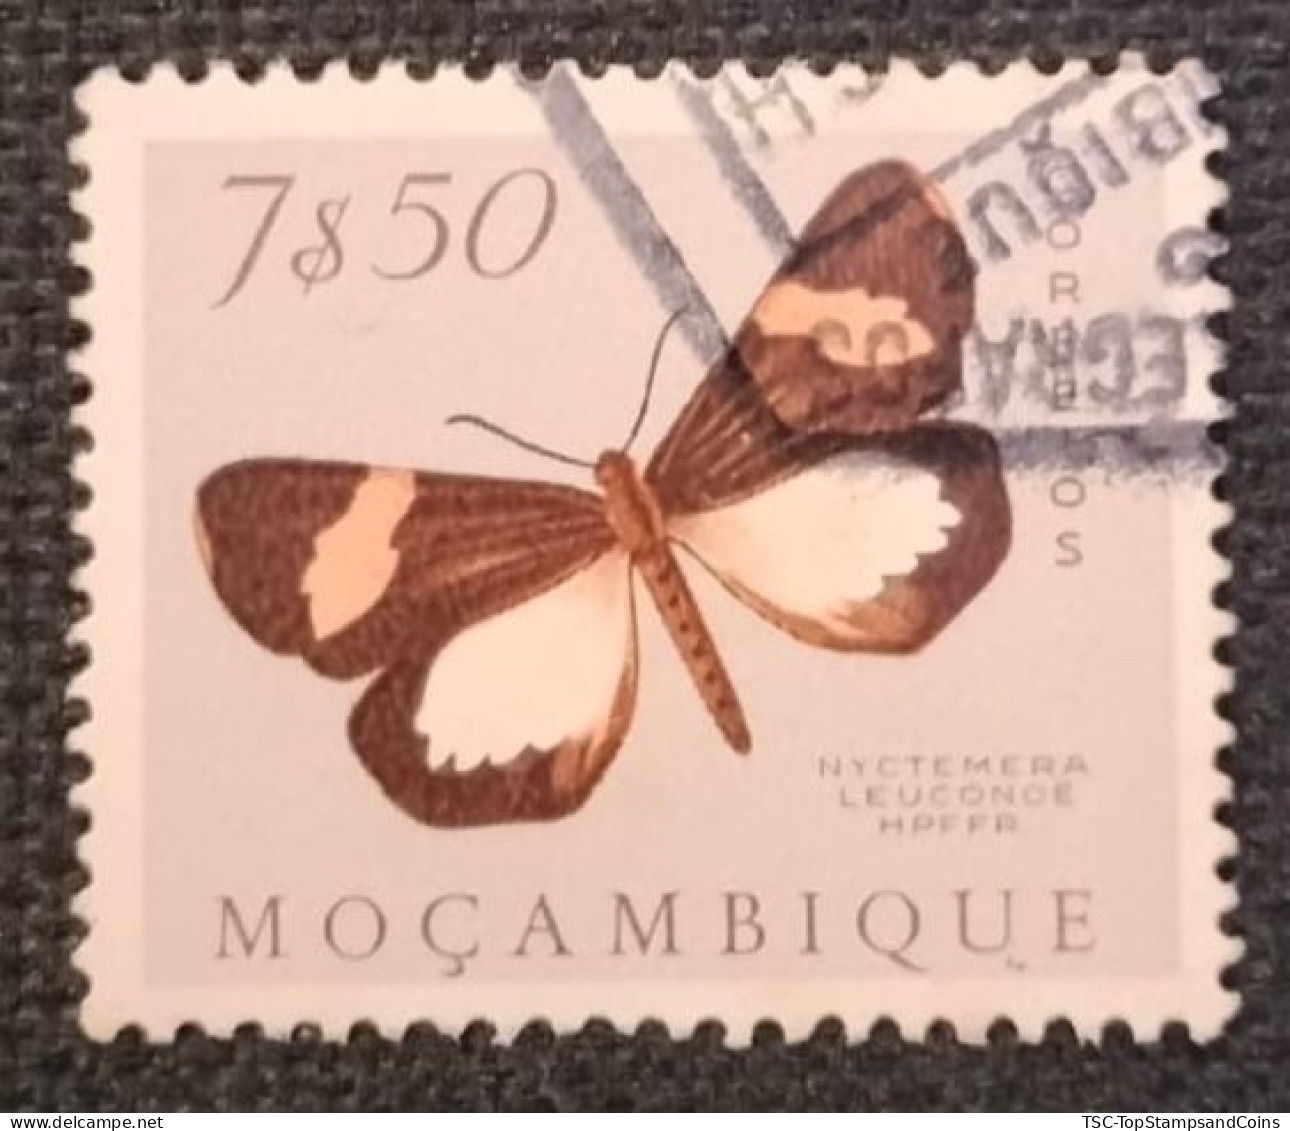 MOZPO0405UD - Mozambique Butterflies - 7$50 Used Stamp - Mozambique - 1953 - Mosambik